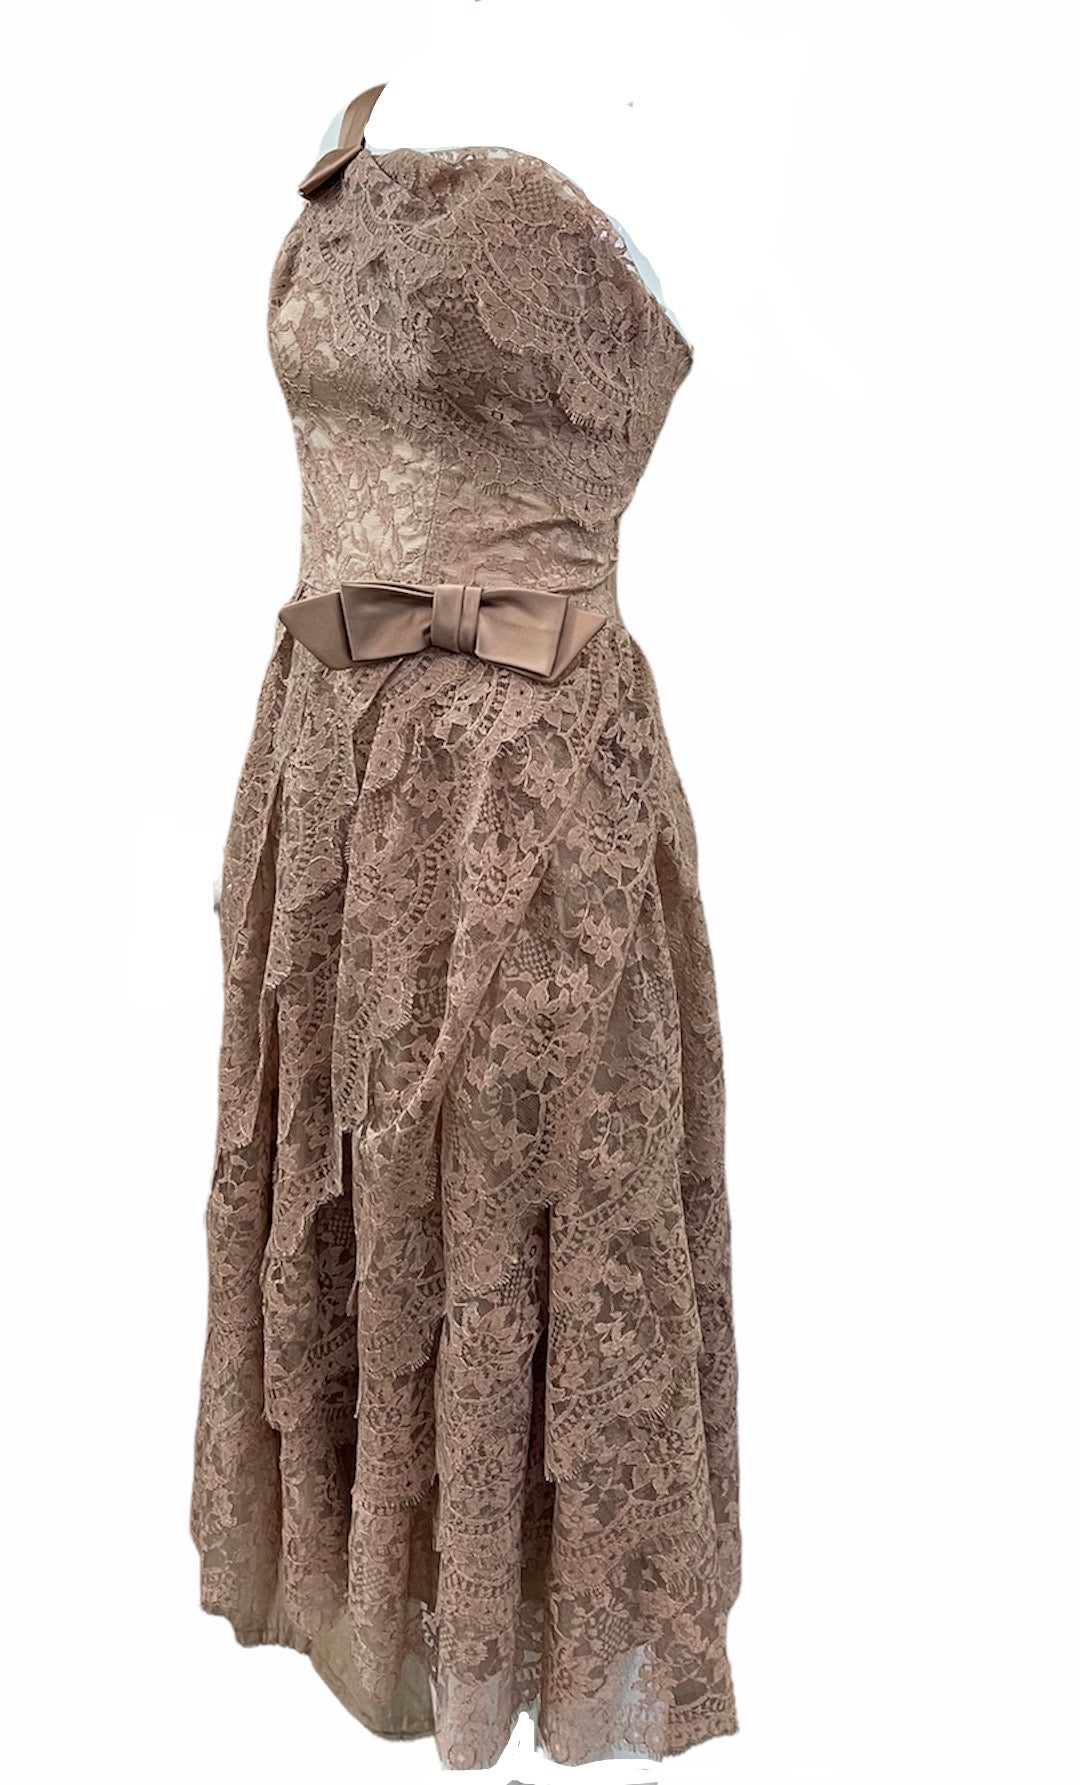 50s Mocha Brown Lace Cocktail Dress  SIDE 2 of 5